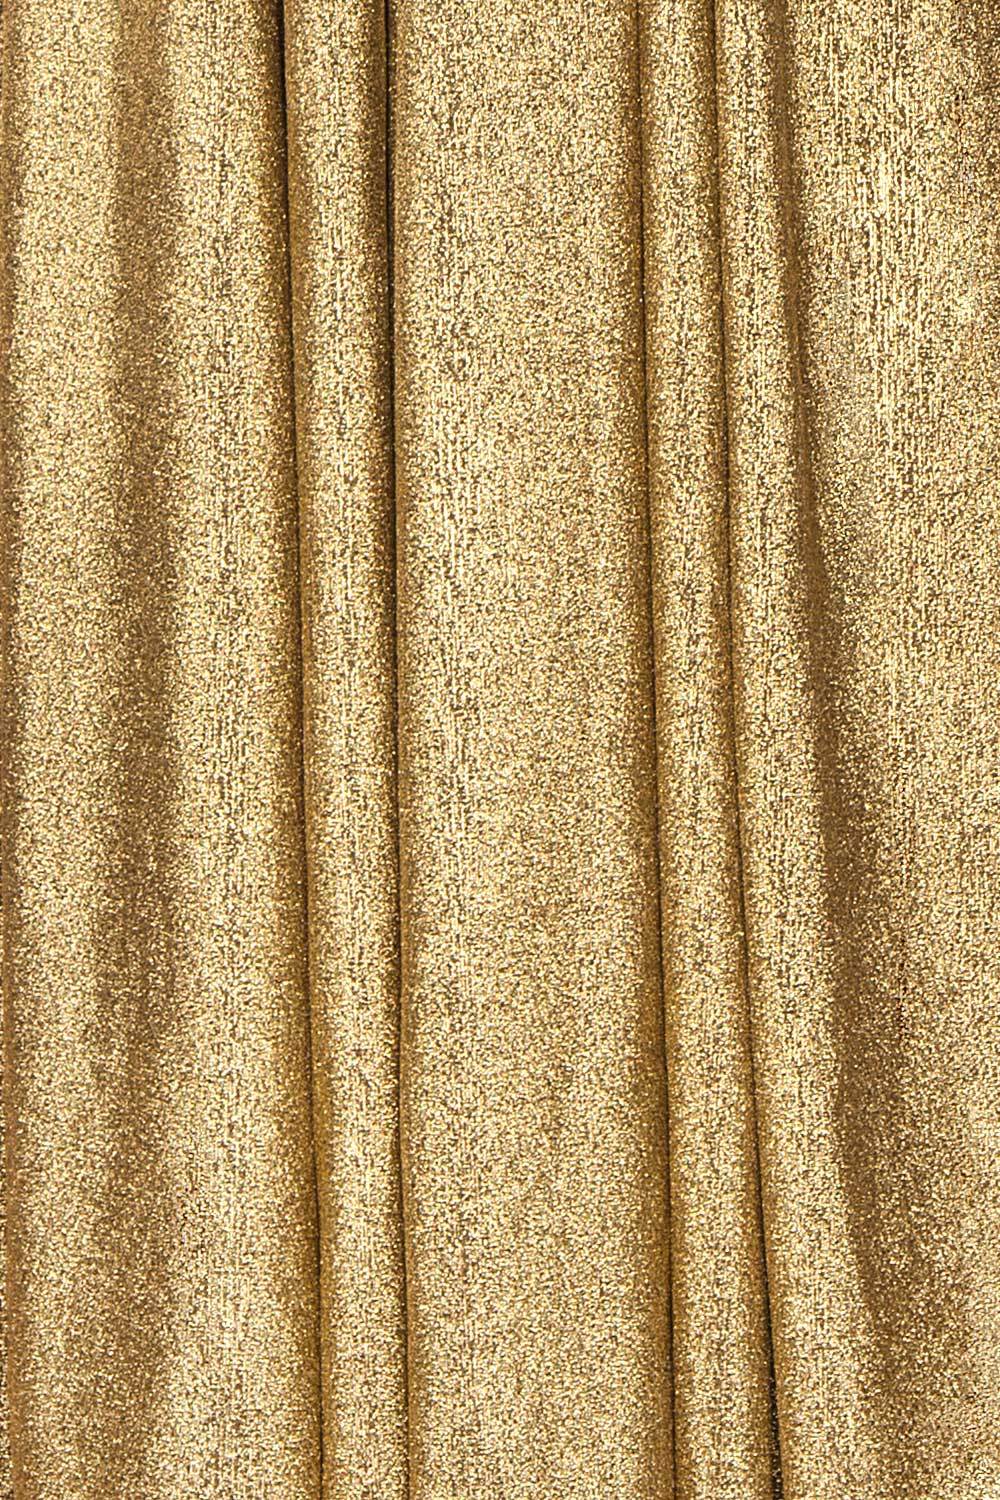 Anywa Or Gold Glitter Dress | Robe Longue fabric detail | Boutique 1861